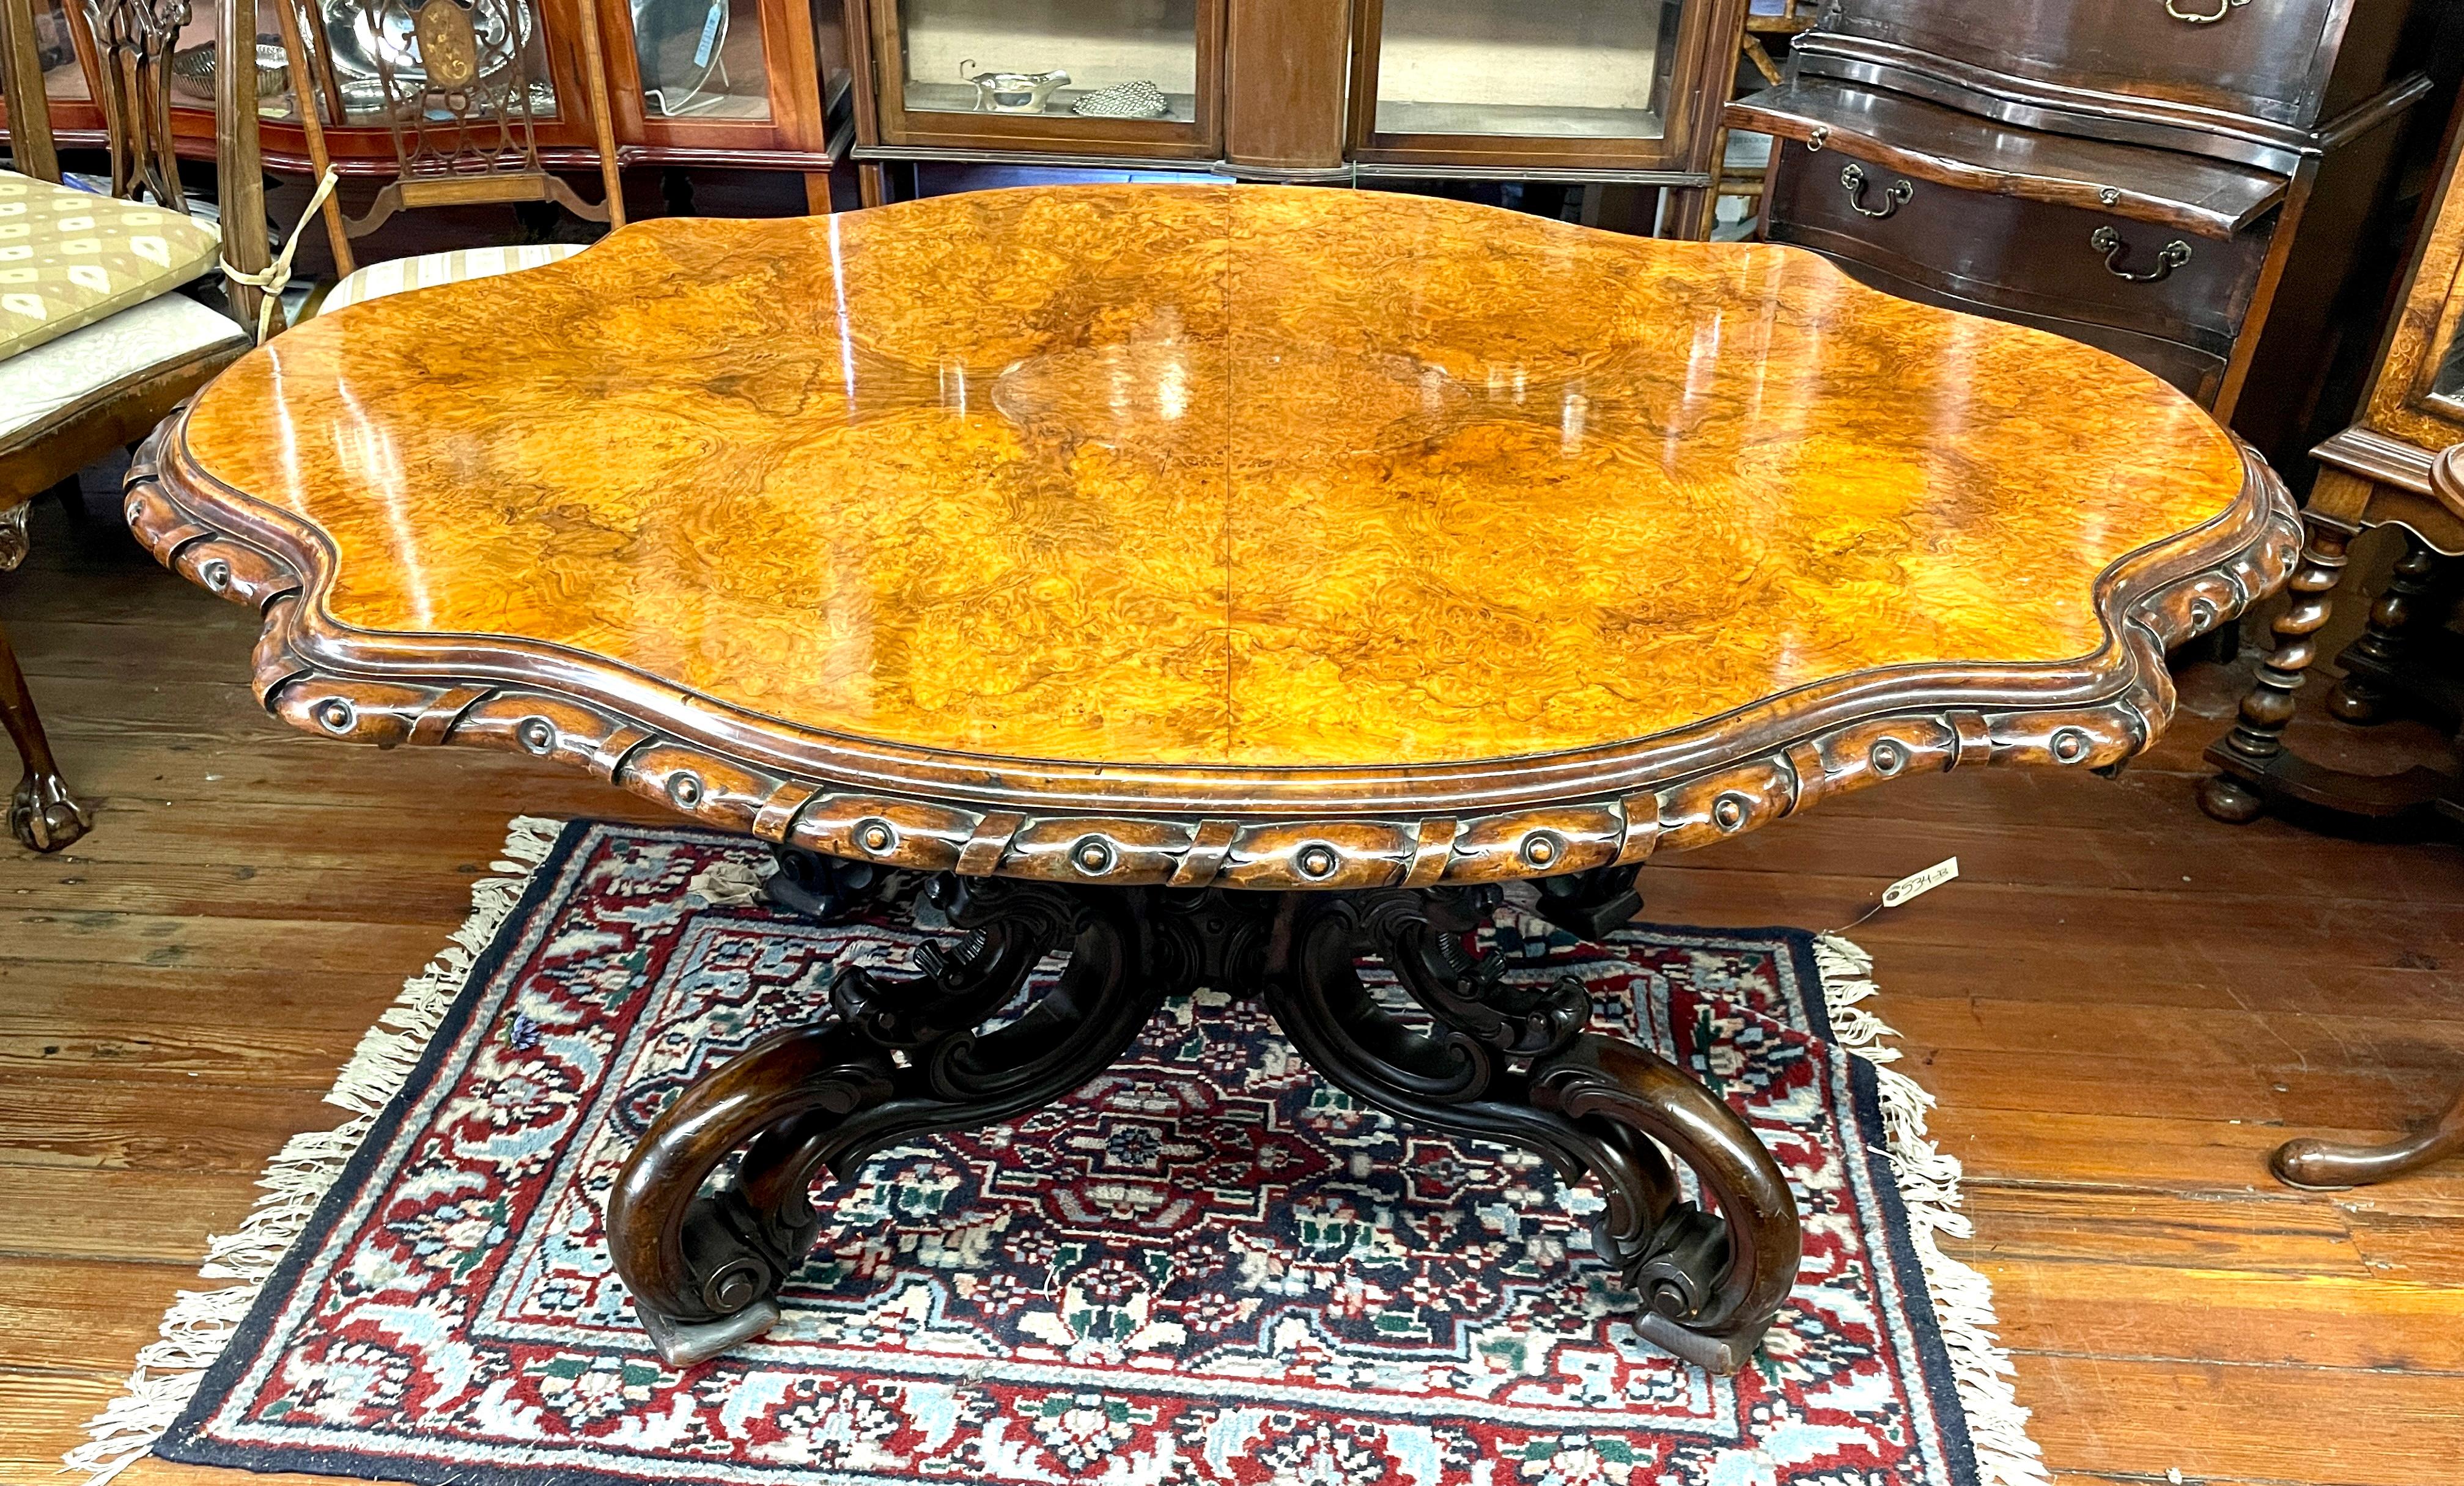 Of all of the Antique English burr walnut Loo, Centre or Breakfast Table we have ever sold, this may be the finest, most exquisite one ever found on a UK buying trip.  The top is magnificently shaped with an extraordinary belt or rope-carved edge